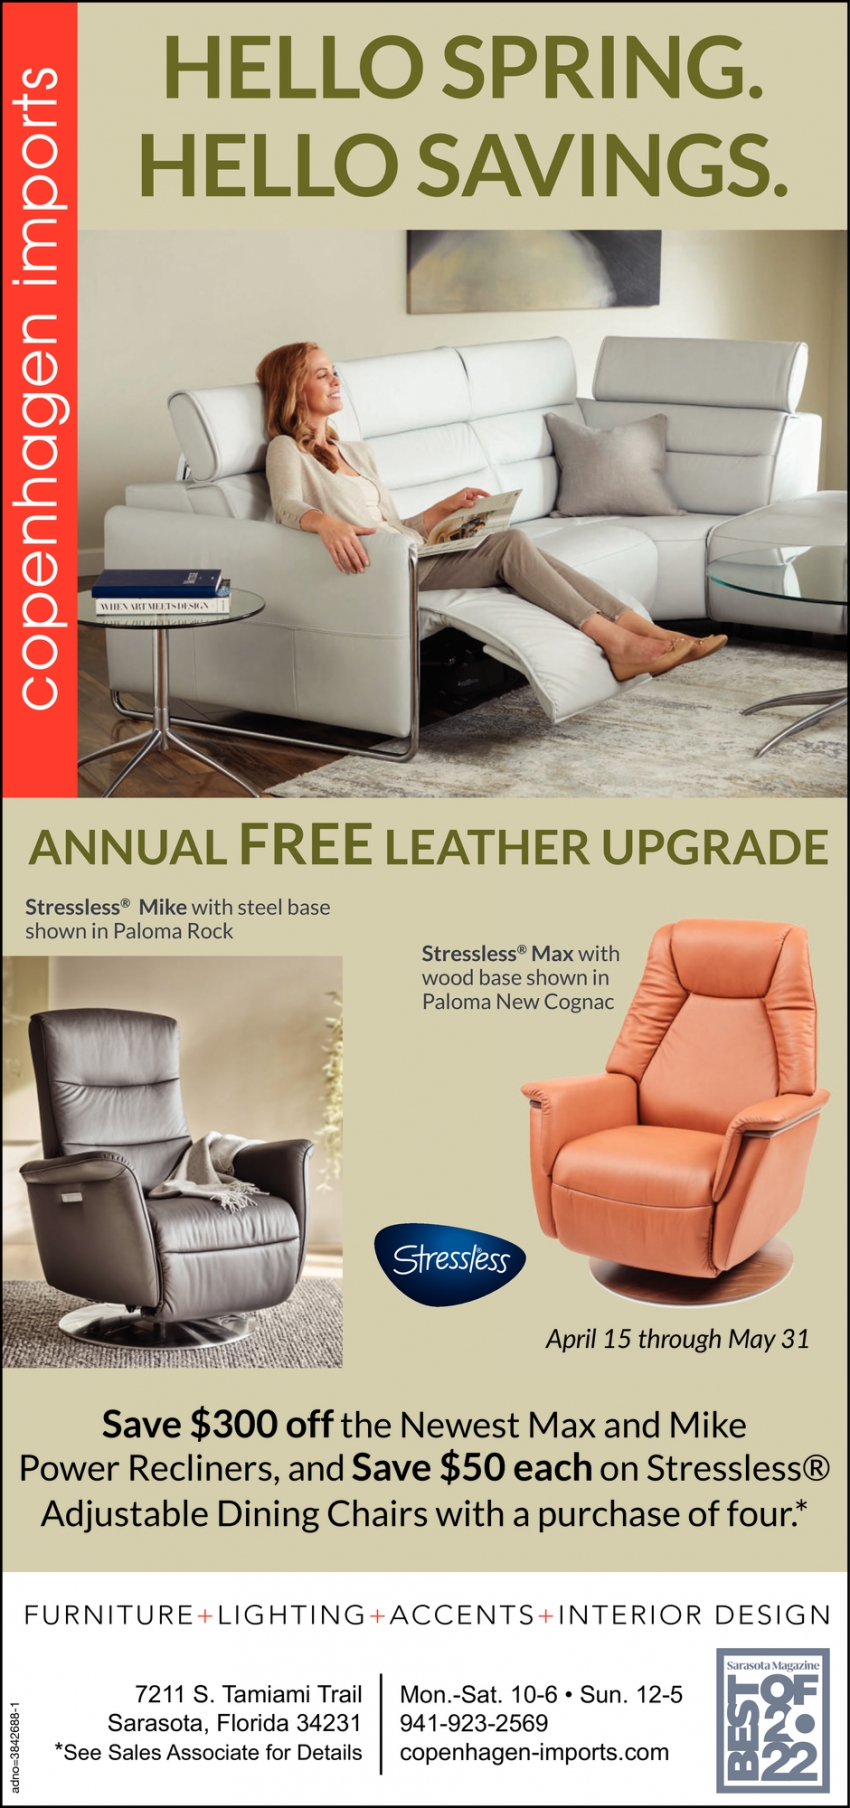 Annual Free Leather Upgrade